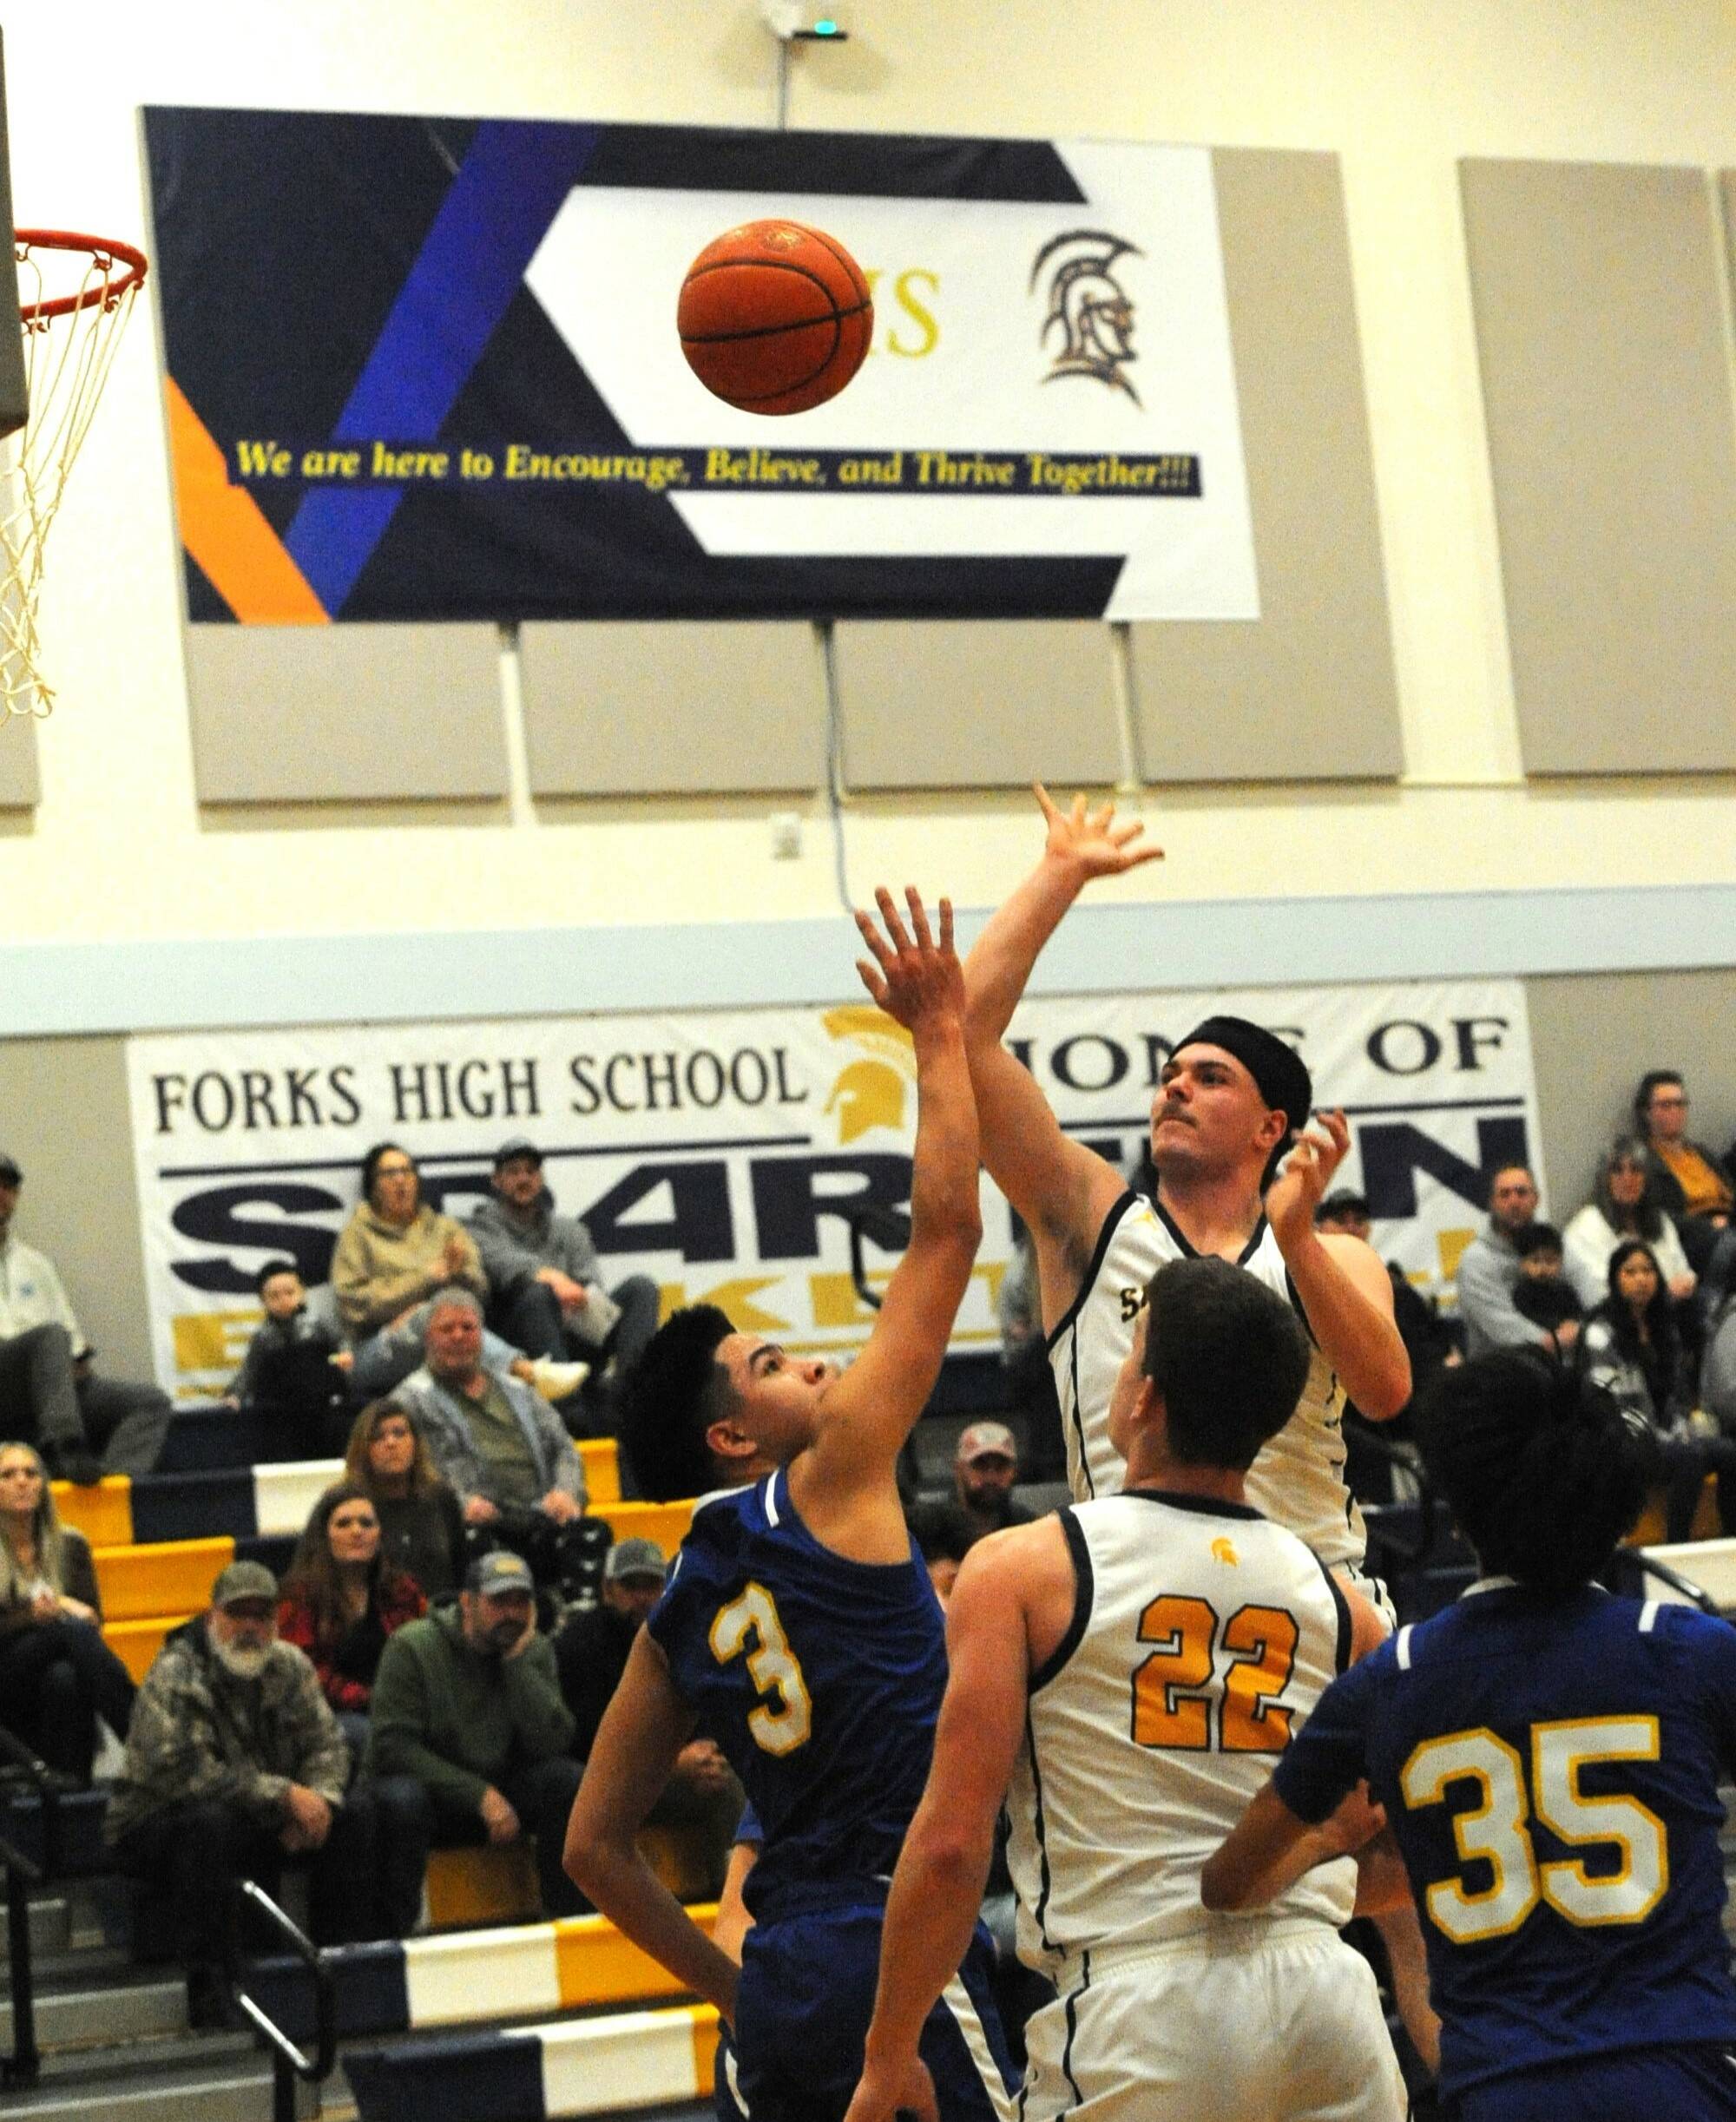 Forks’ Senior Landin Davis takes a shot over Chief Leschi defenders while Spartan Brody Lausche looks on during Senior Night at Forks High School. Photo by Lonnie Archibald